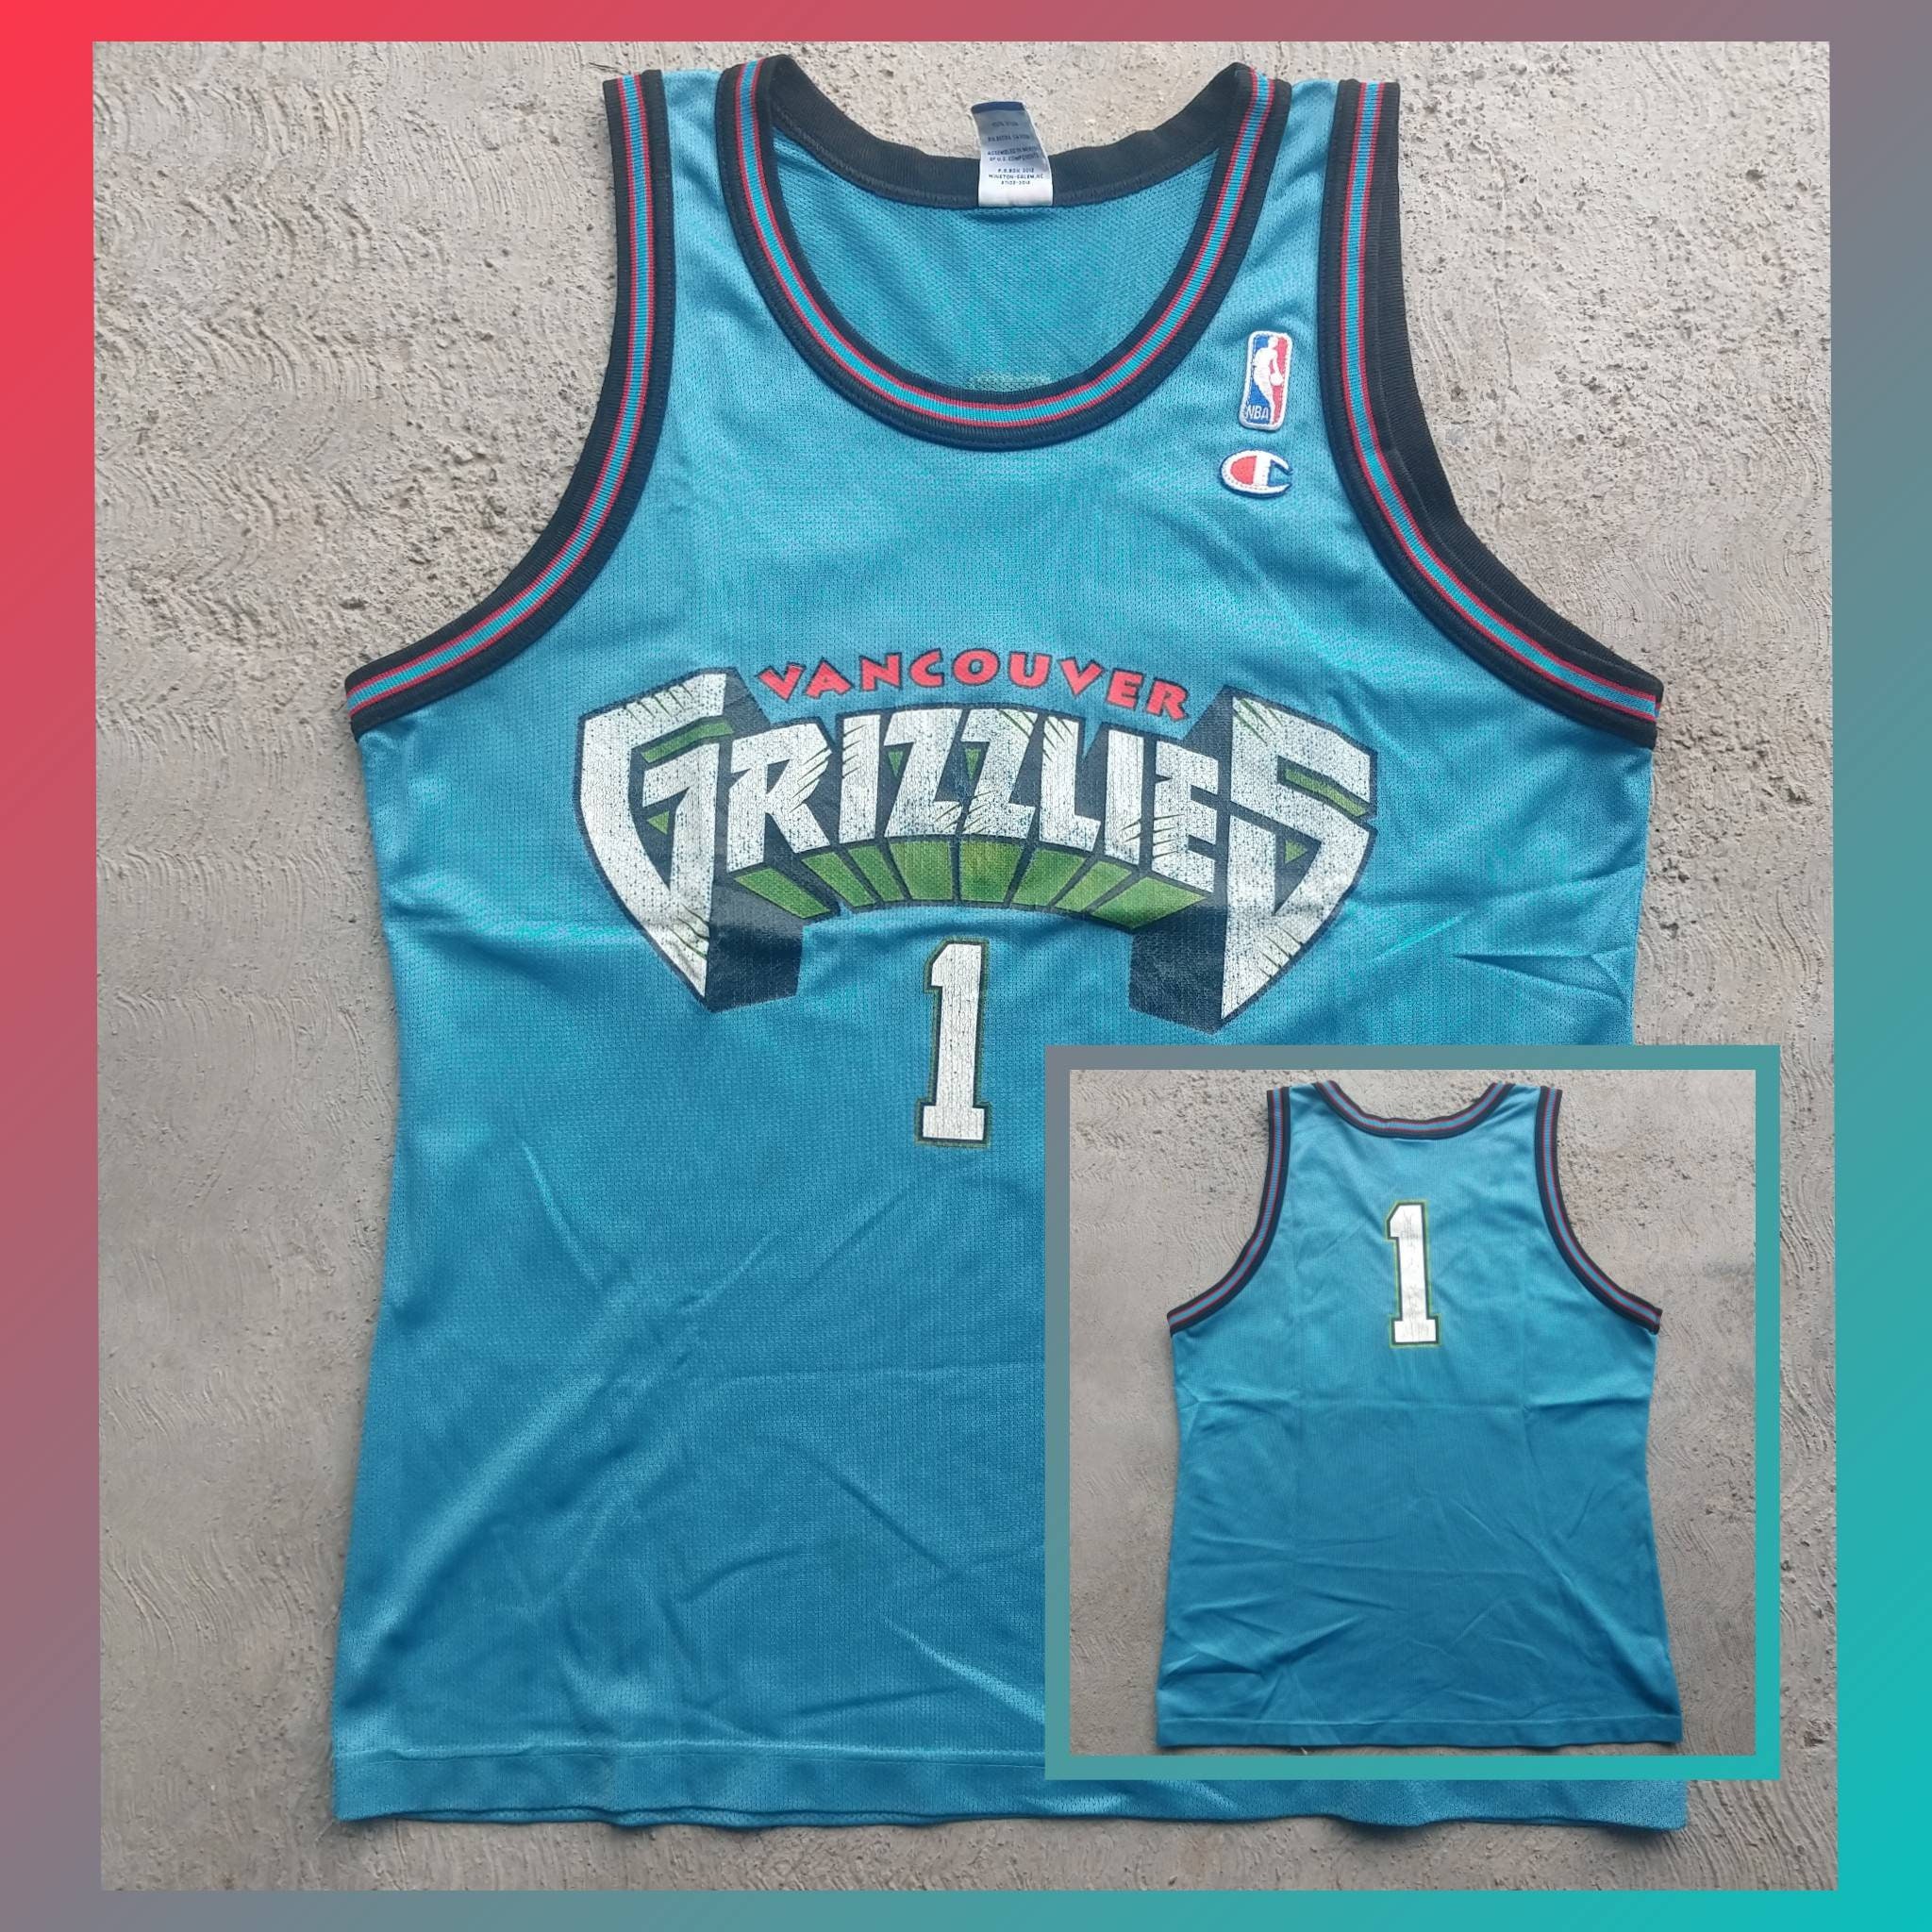 BRYANT REEVES VANCOUVER GRIZZLIES Champion Jersey White 44 Large